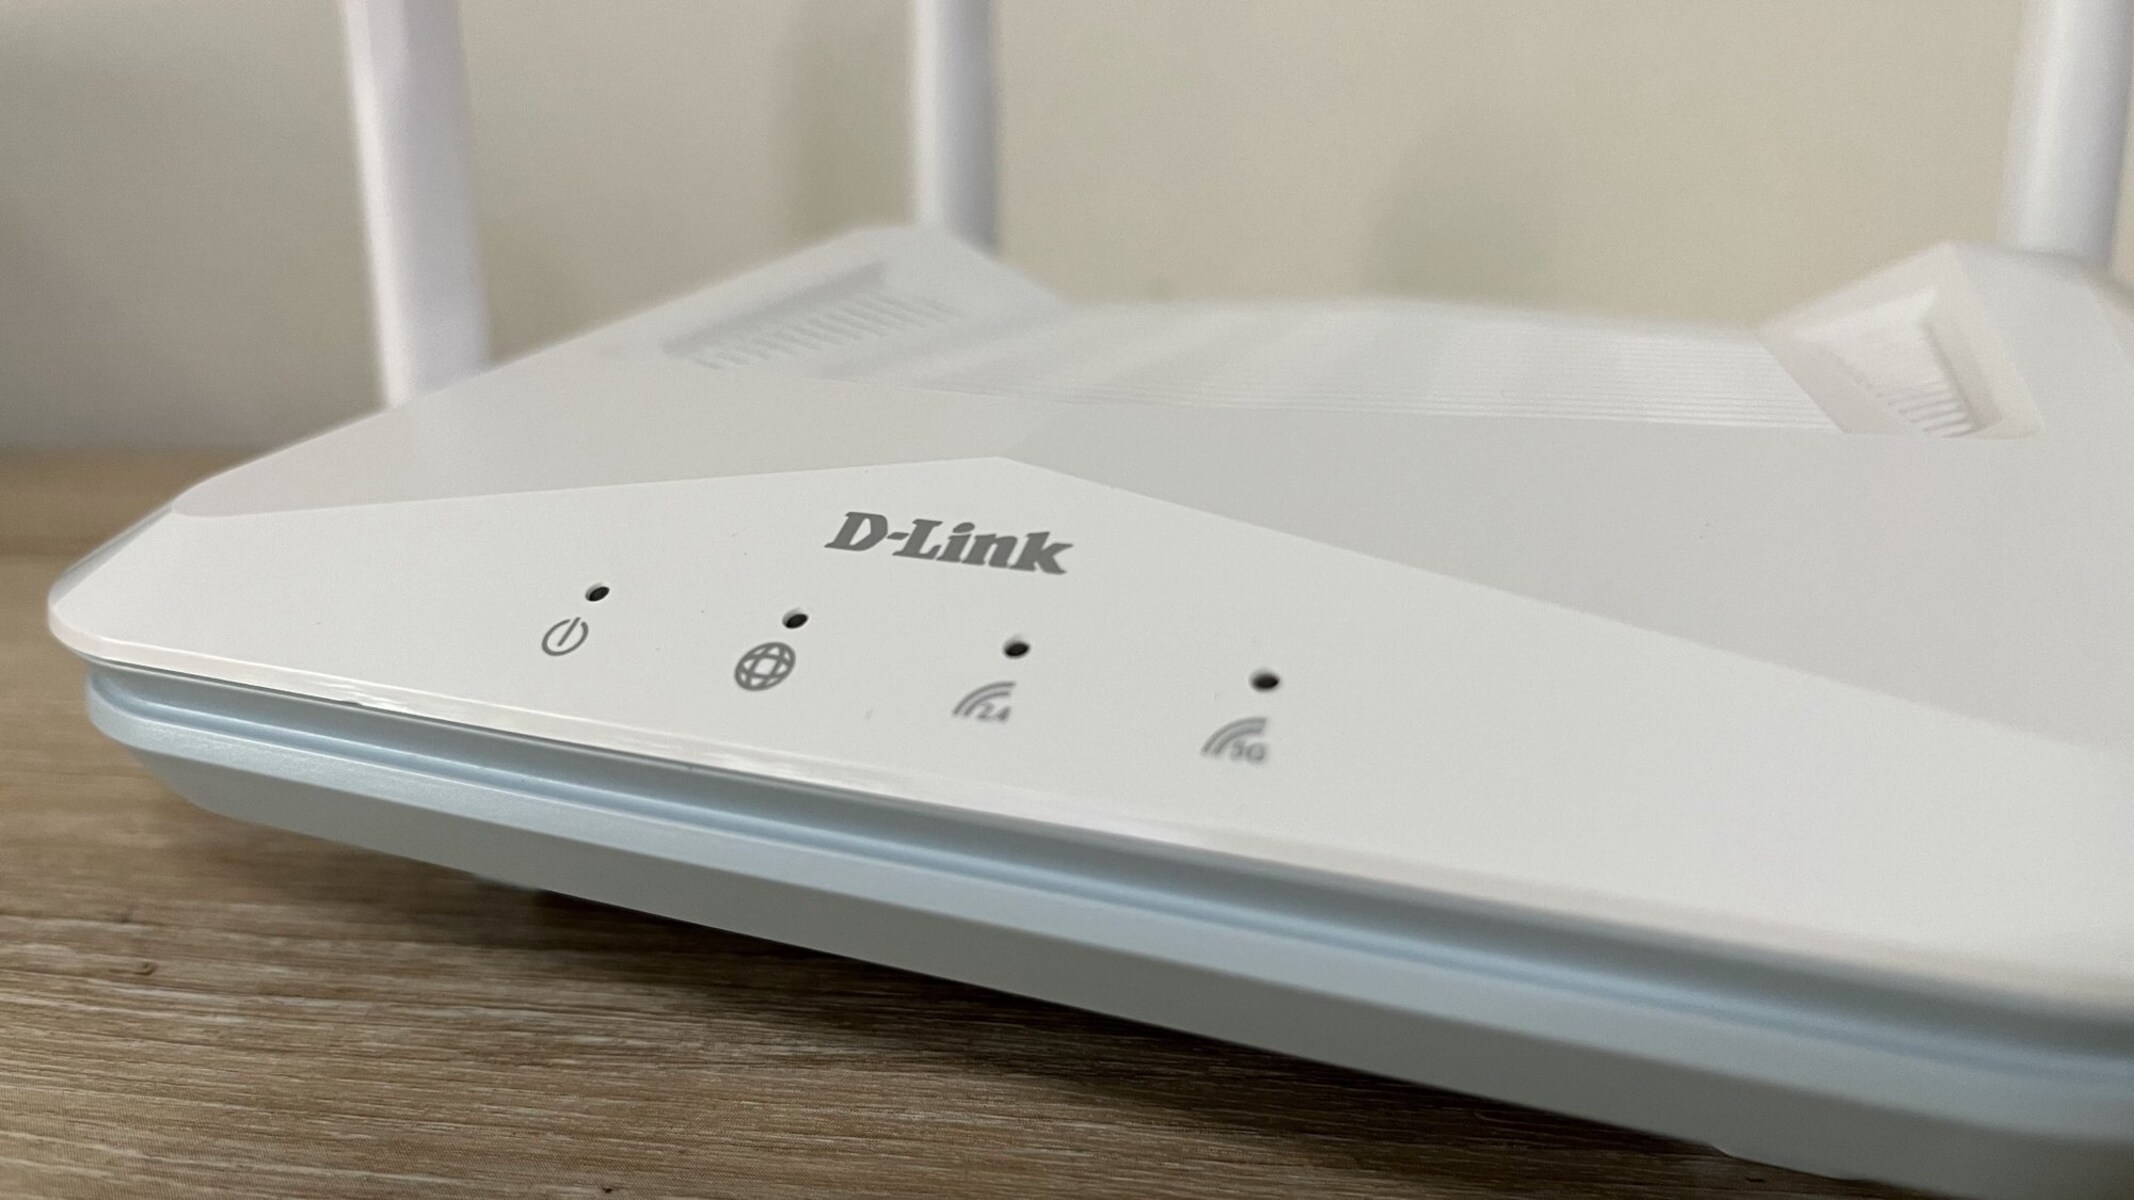 How To Access My Dlink Wireless Router